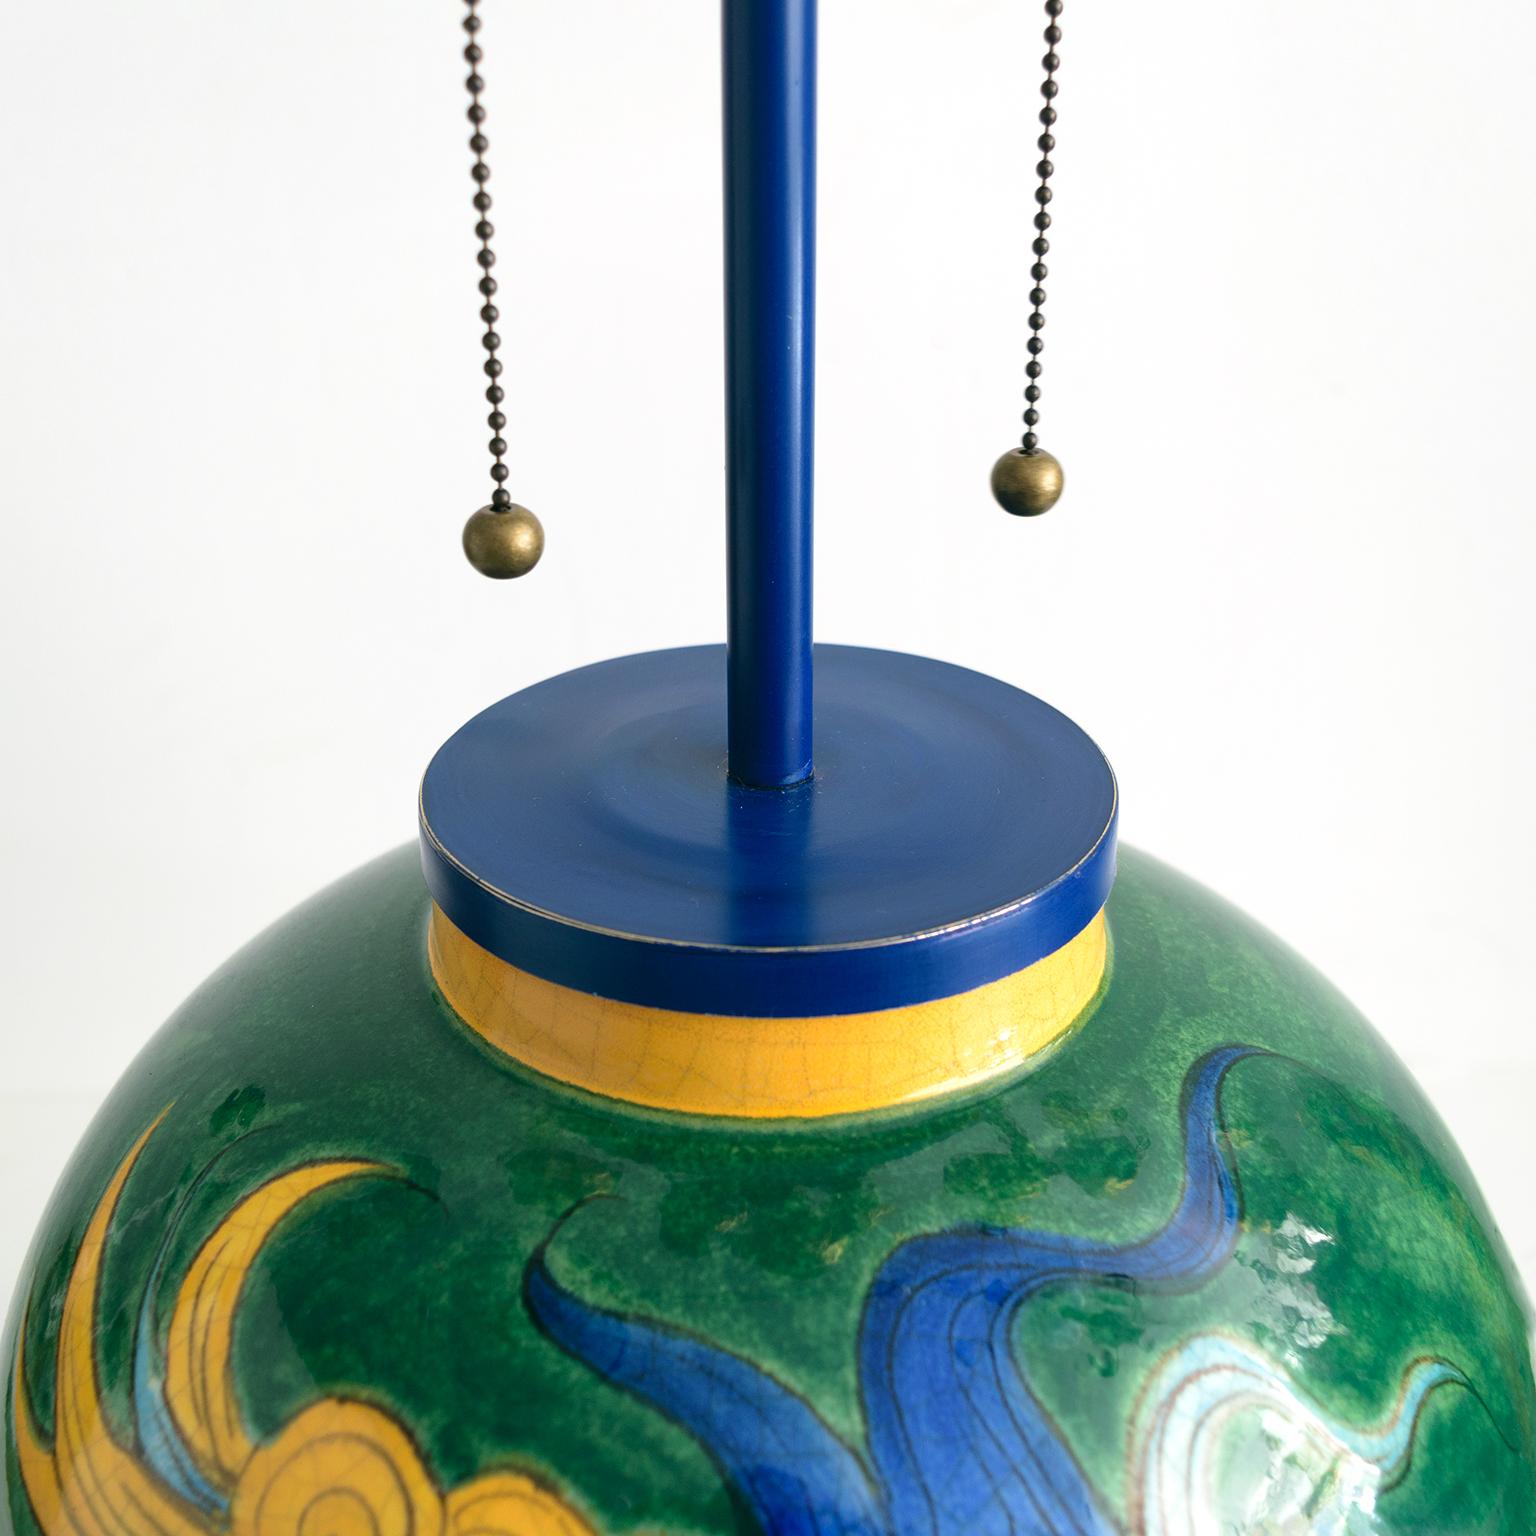 Mid-Century Modern Louis Drimmer Ceramic Table Lamp with Blue & Yellow Faces on Green Body, France For Sale